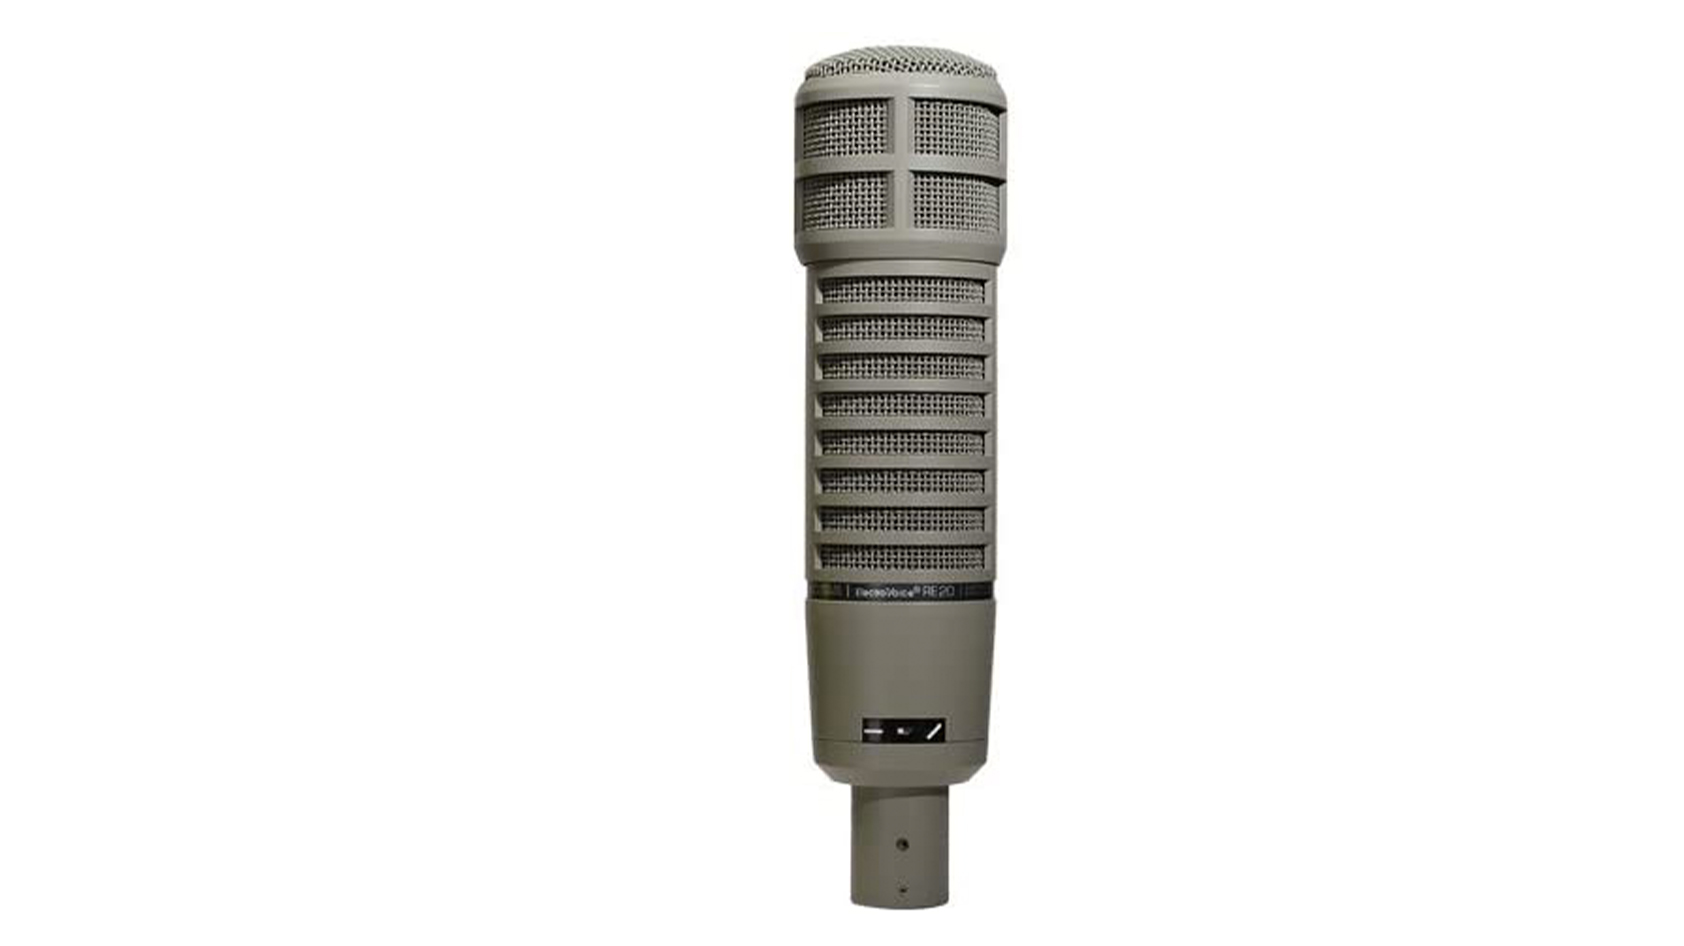 A product image of the Electrovoice RE20 microphone in beige against a white background.